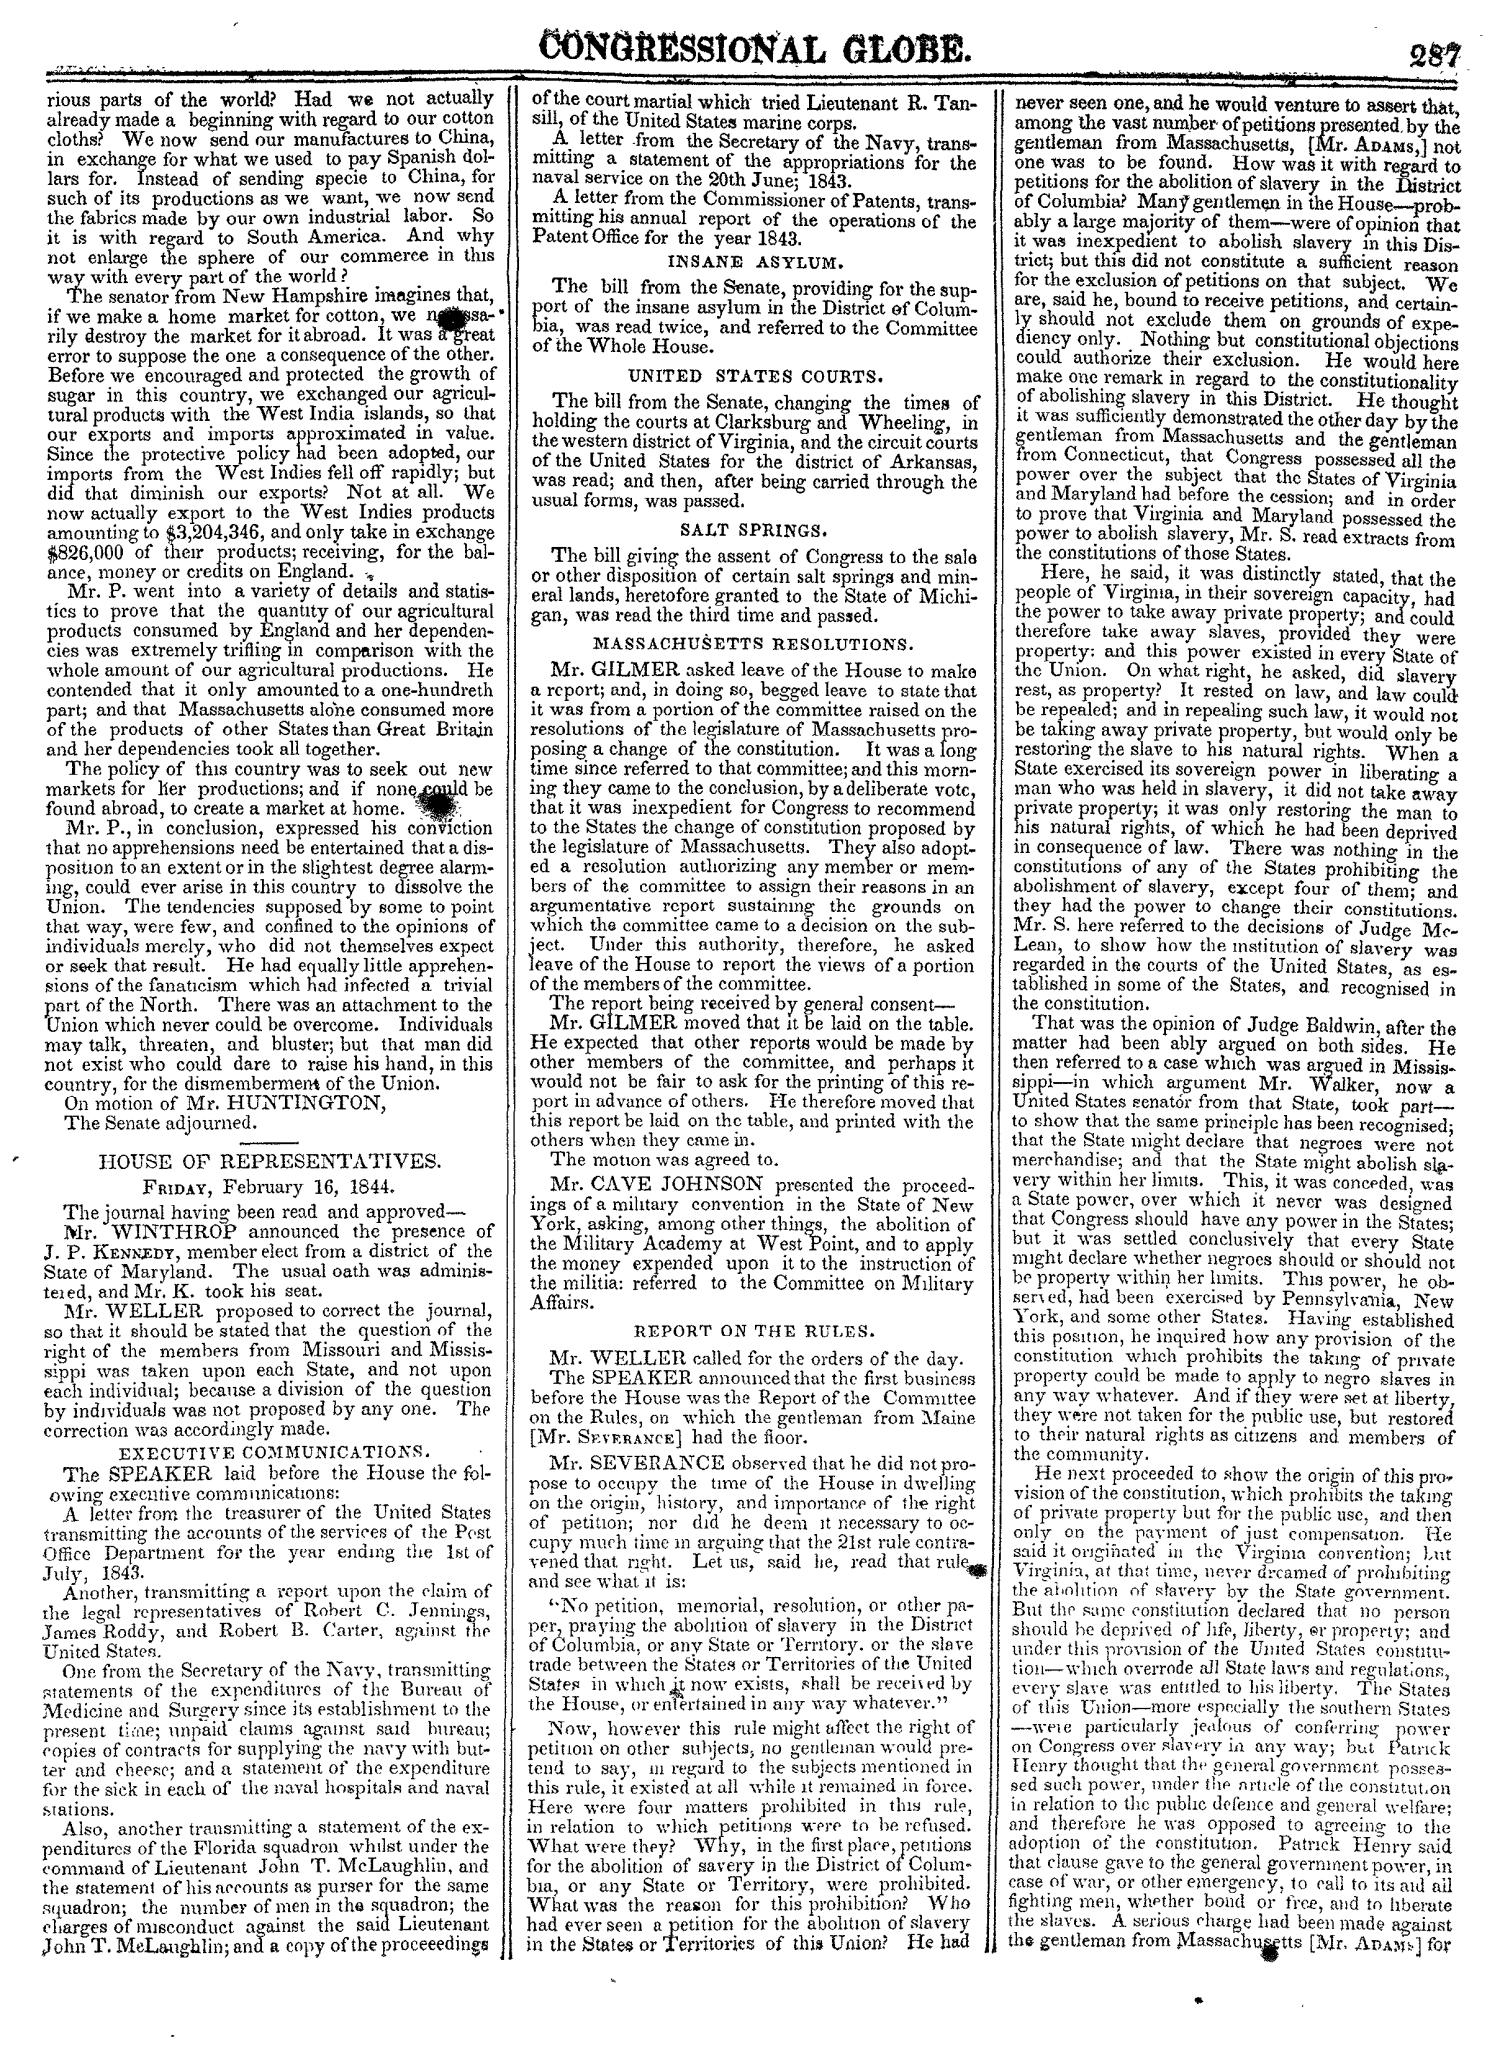 The Congressional Globe, Volume 13, Part 1: Twenty-Eighth Congress, First Session
                                                
                                                    287
                                                